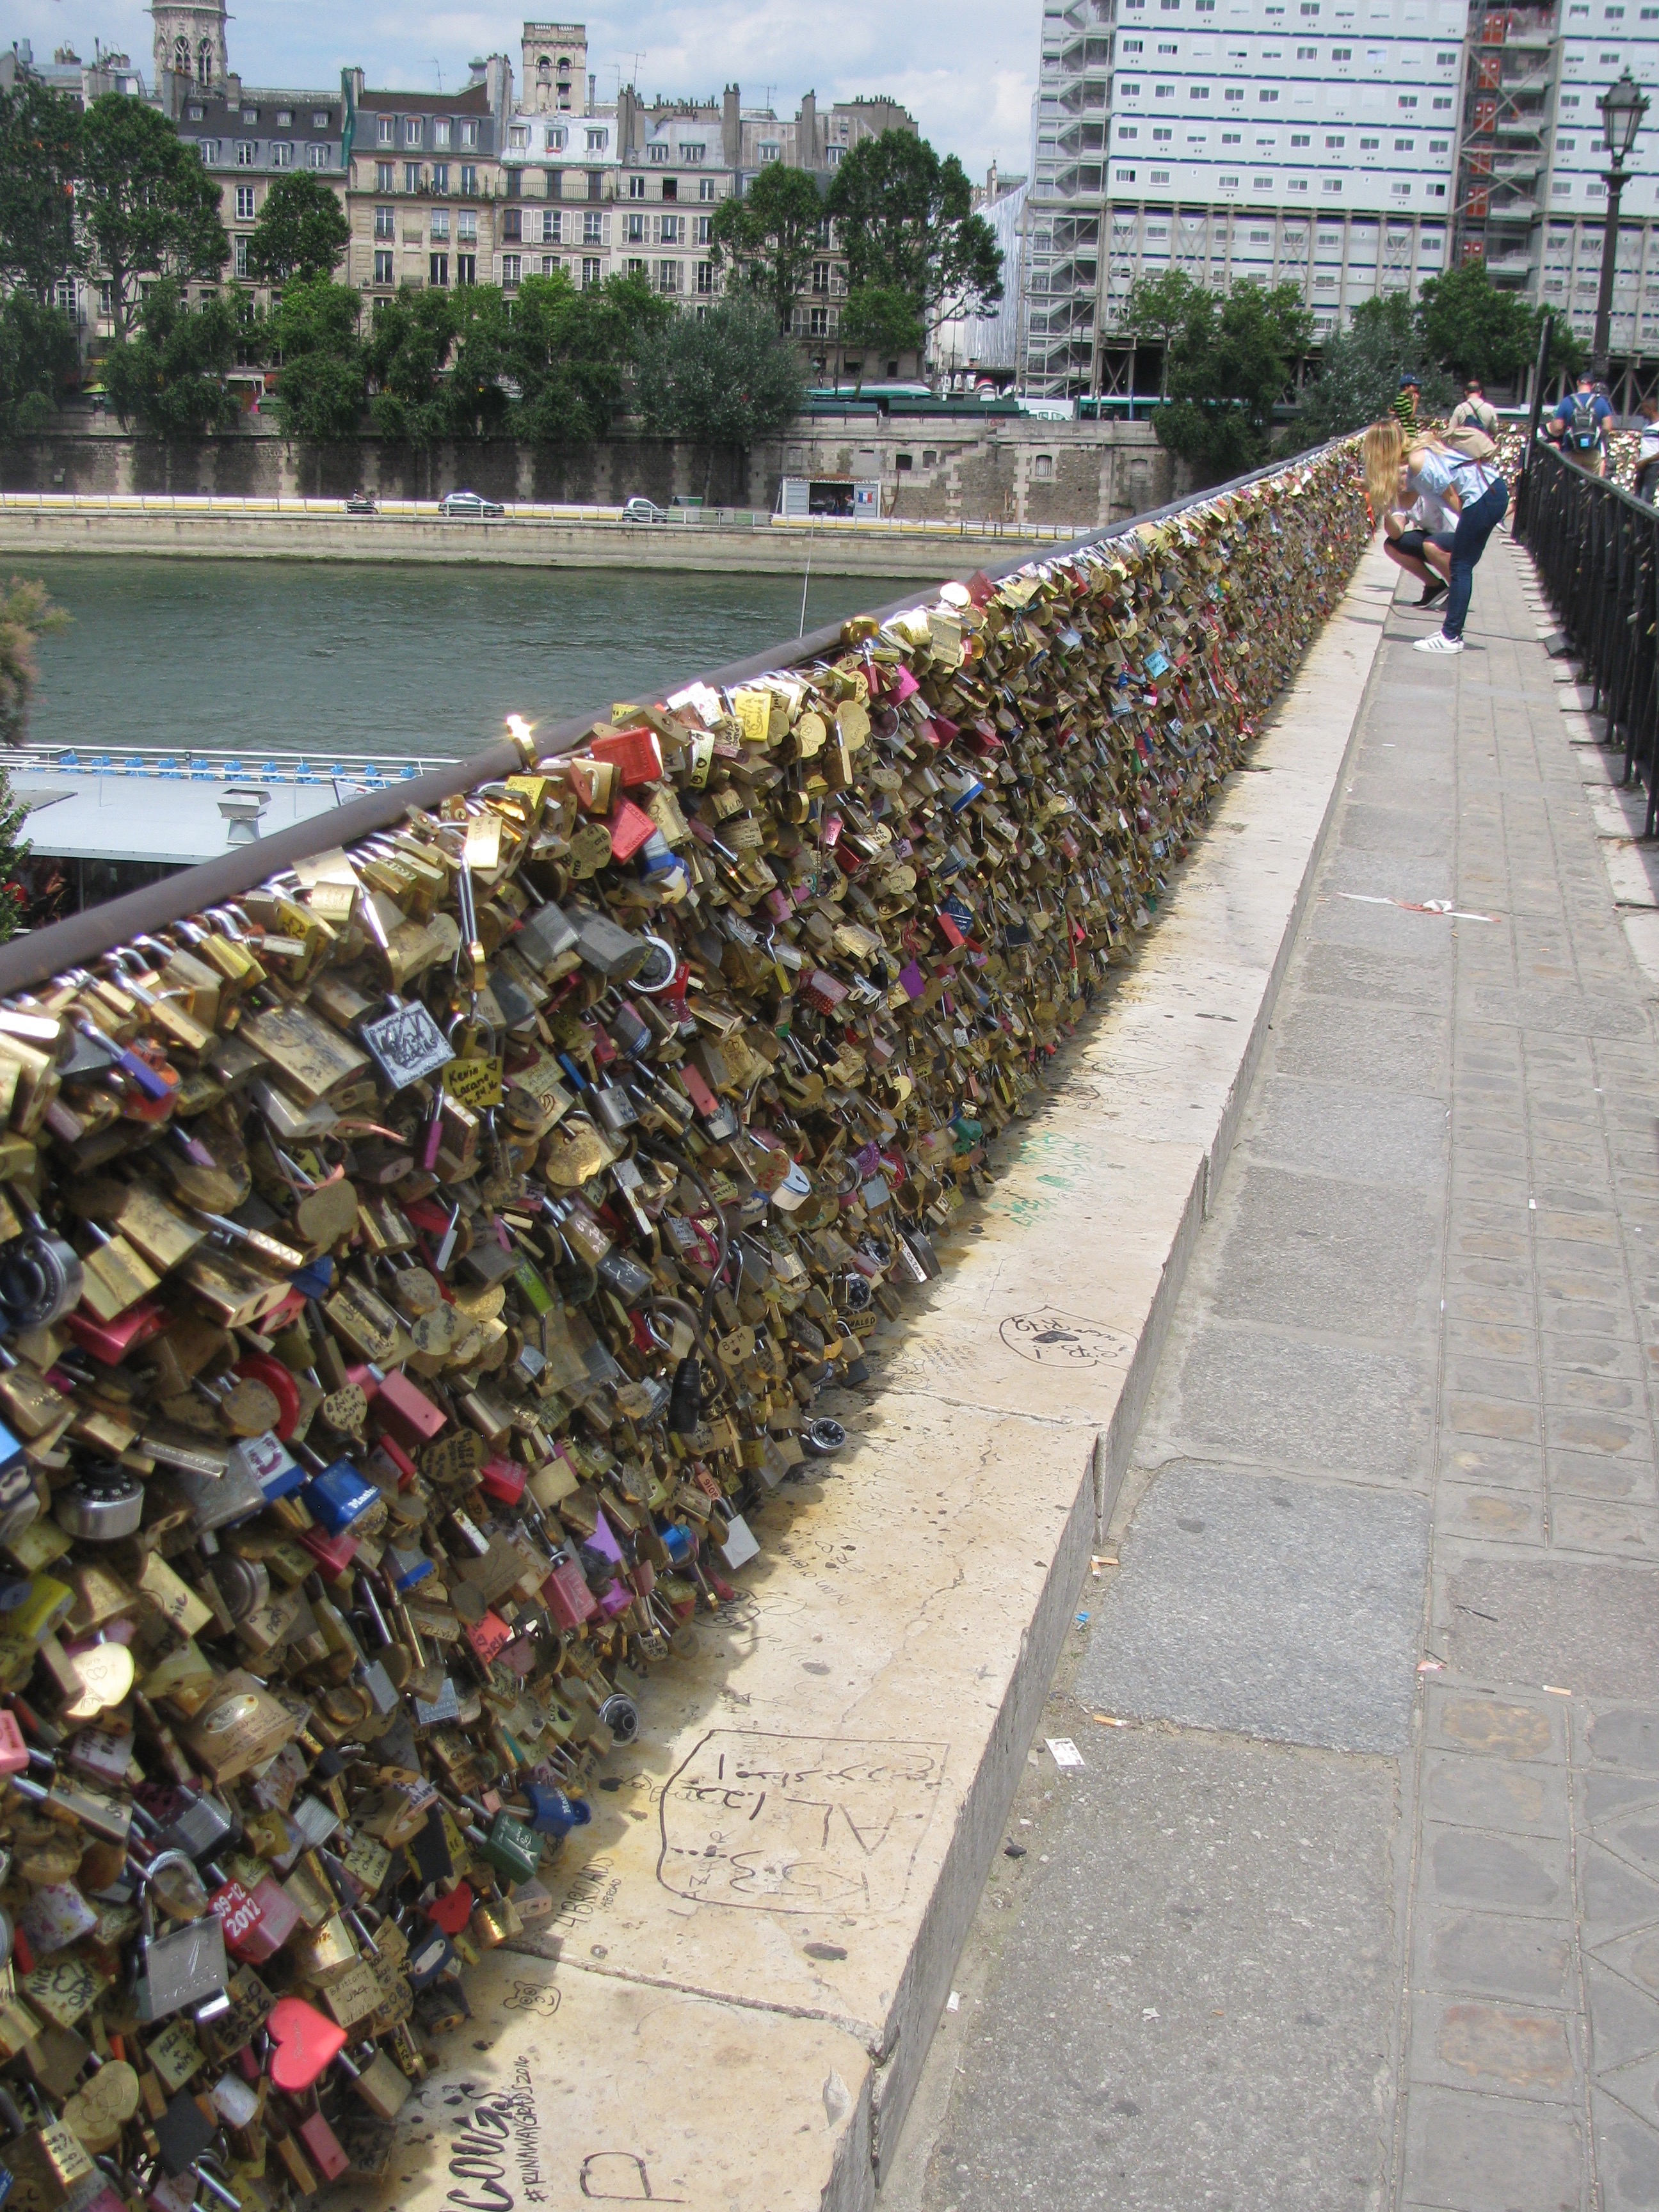 Paris: “Love Locks” in the City of Love | To-ing and Fro-ing in France